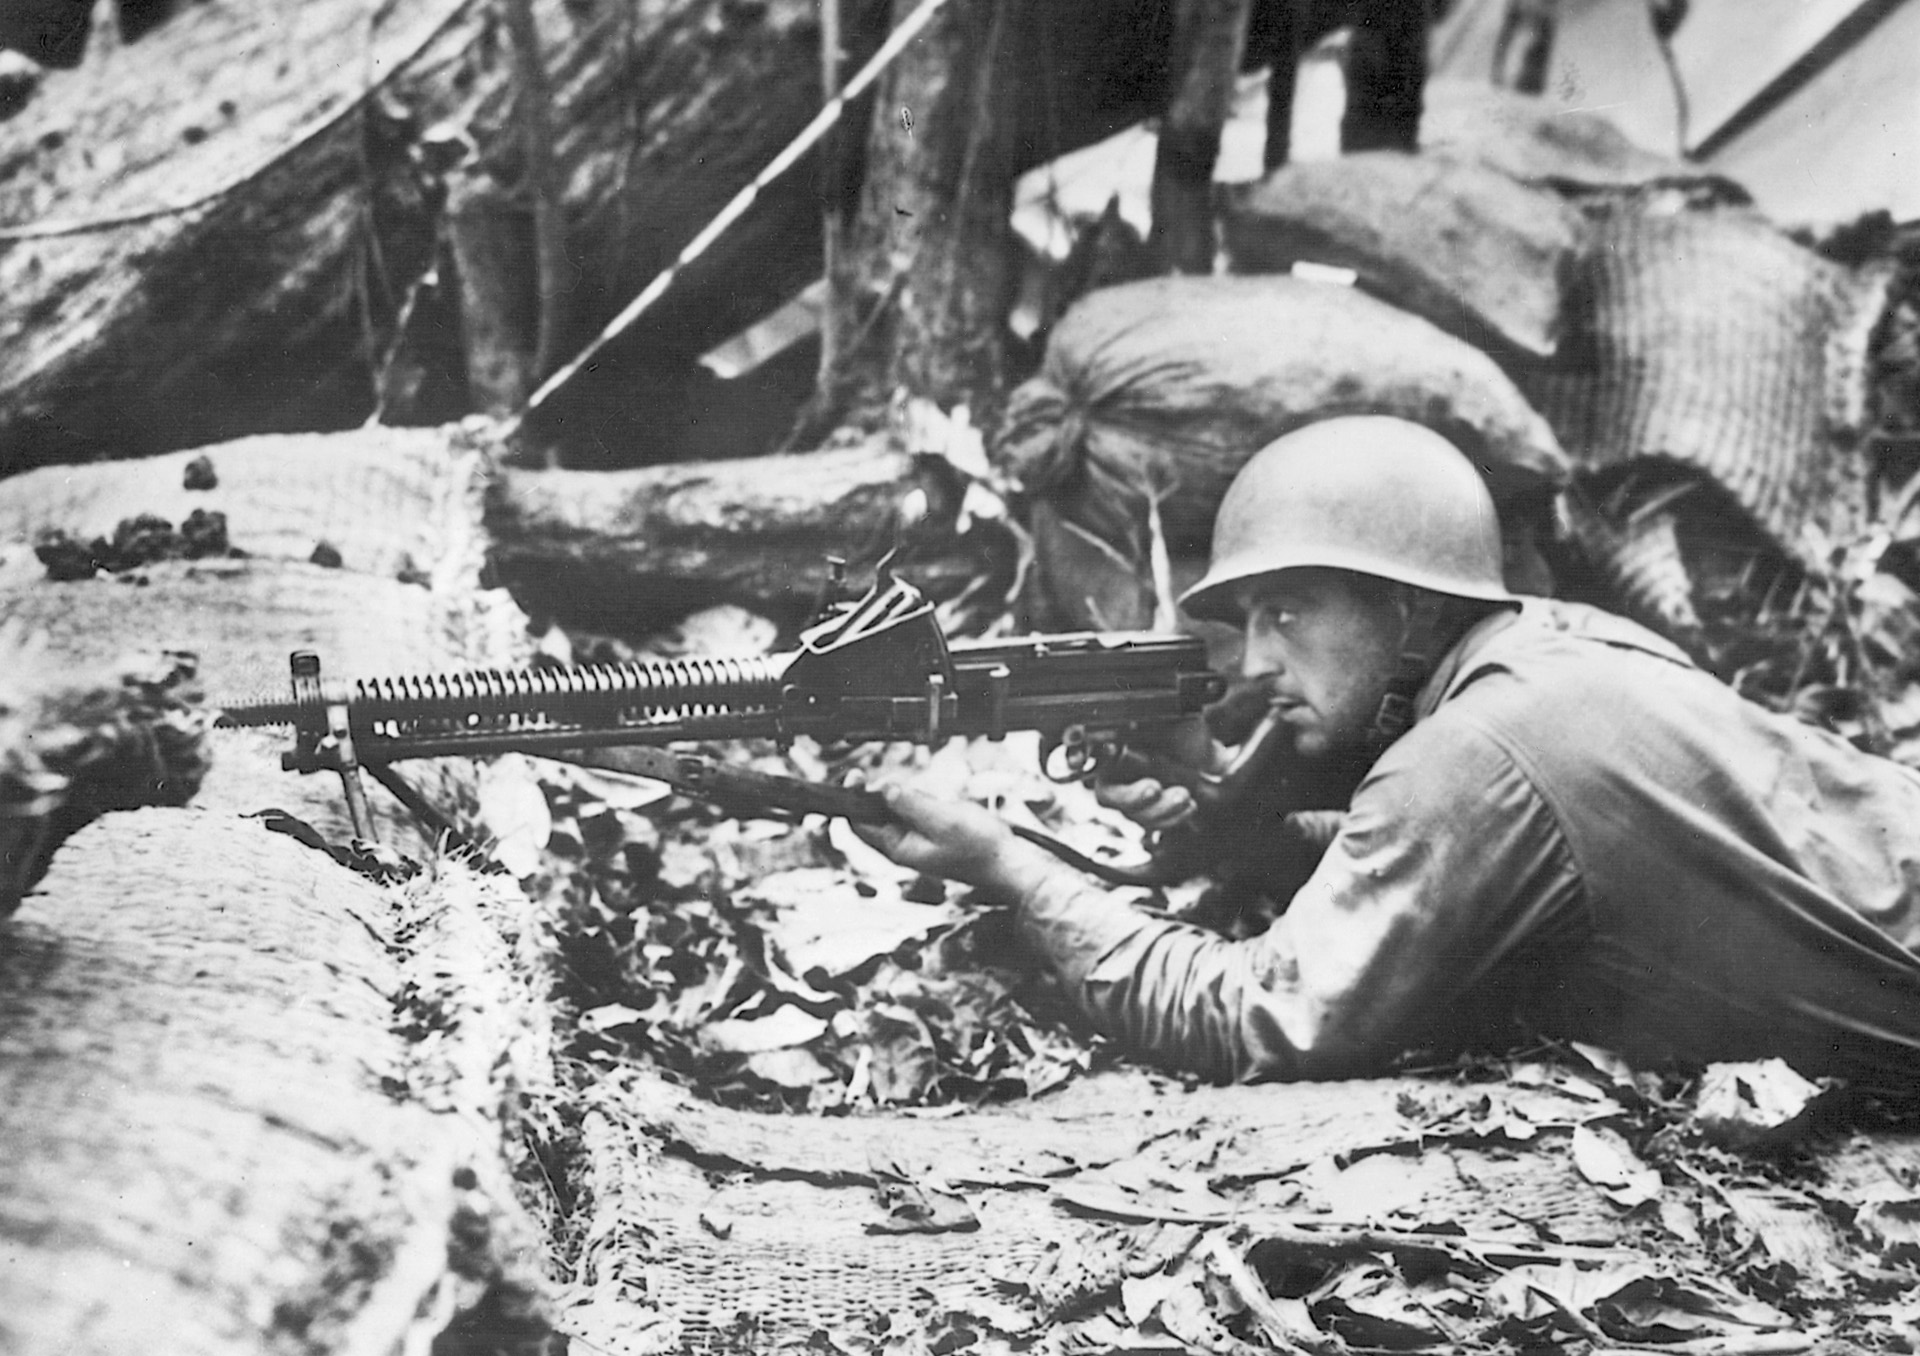 An American soldier takes aim with a captured Japanese 6.5mm light machine gun. The weapon was taken during the savage fighting for Guadalcanal.